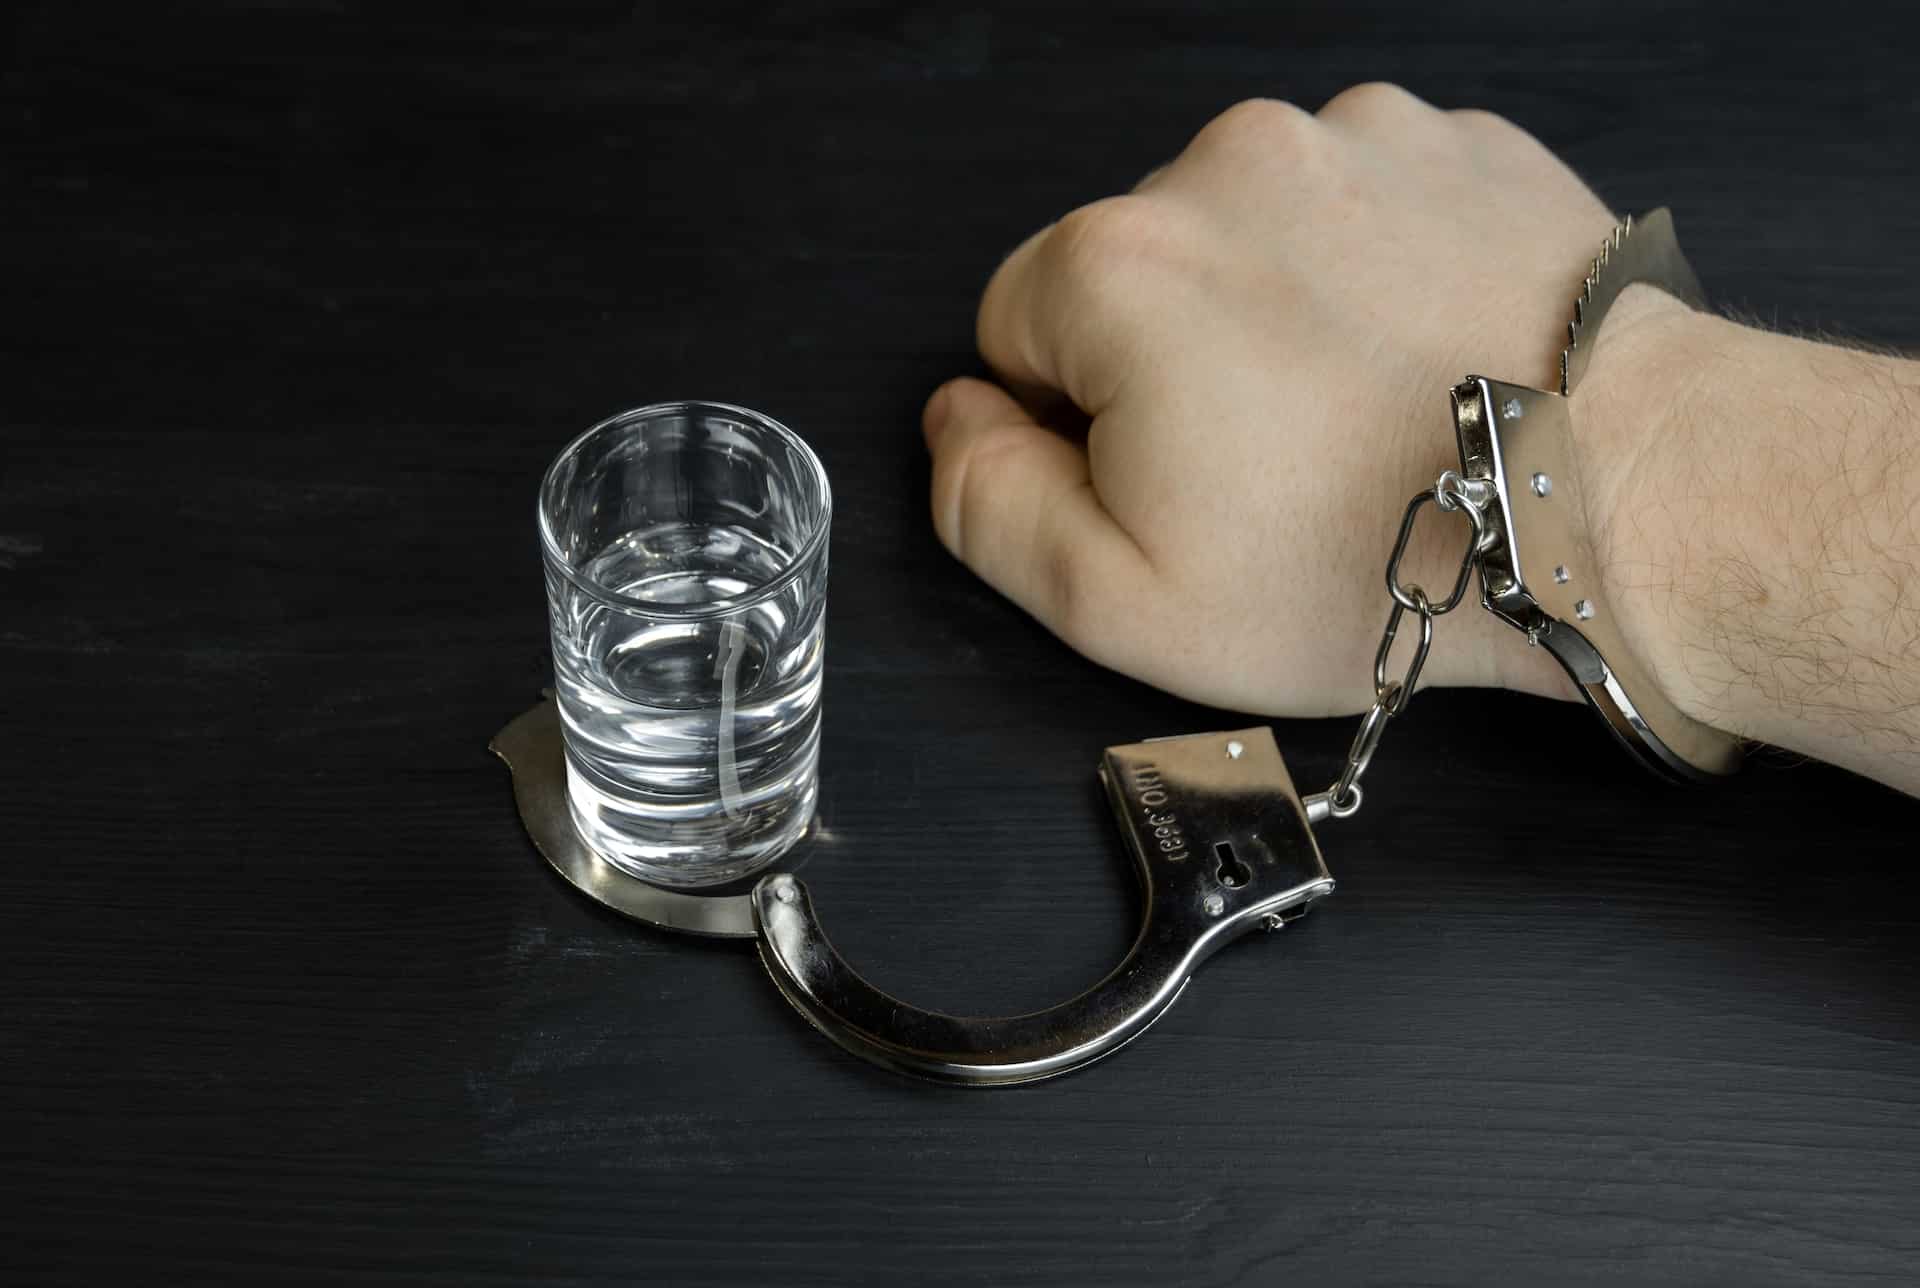 mans hand handcuffed to the glass of vodka or alcohol